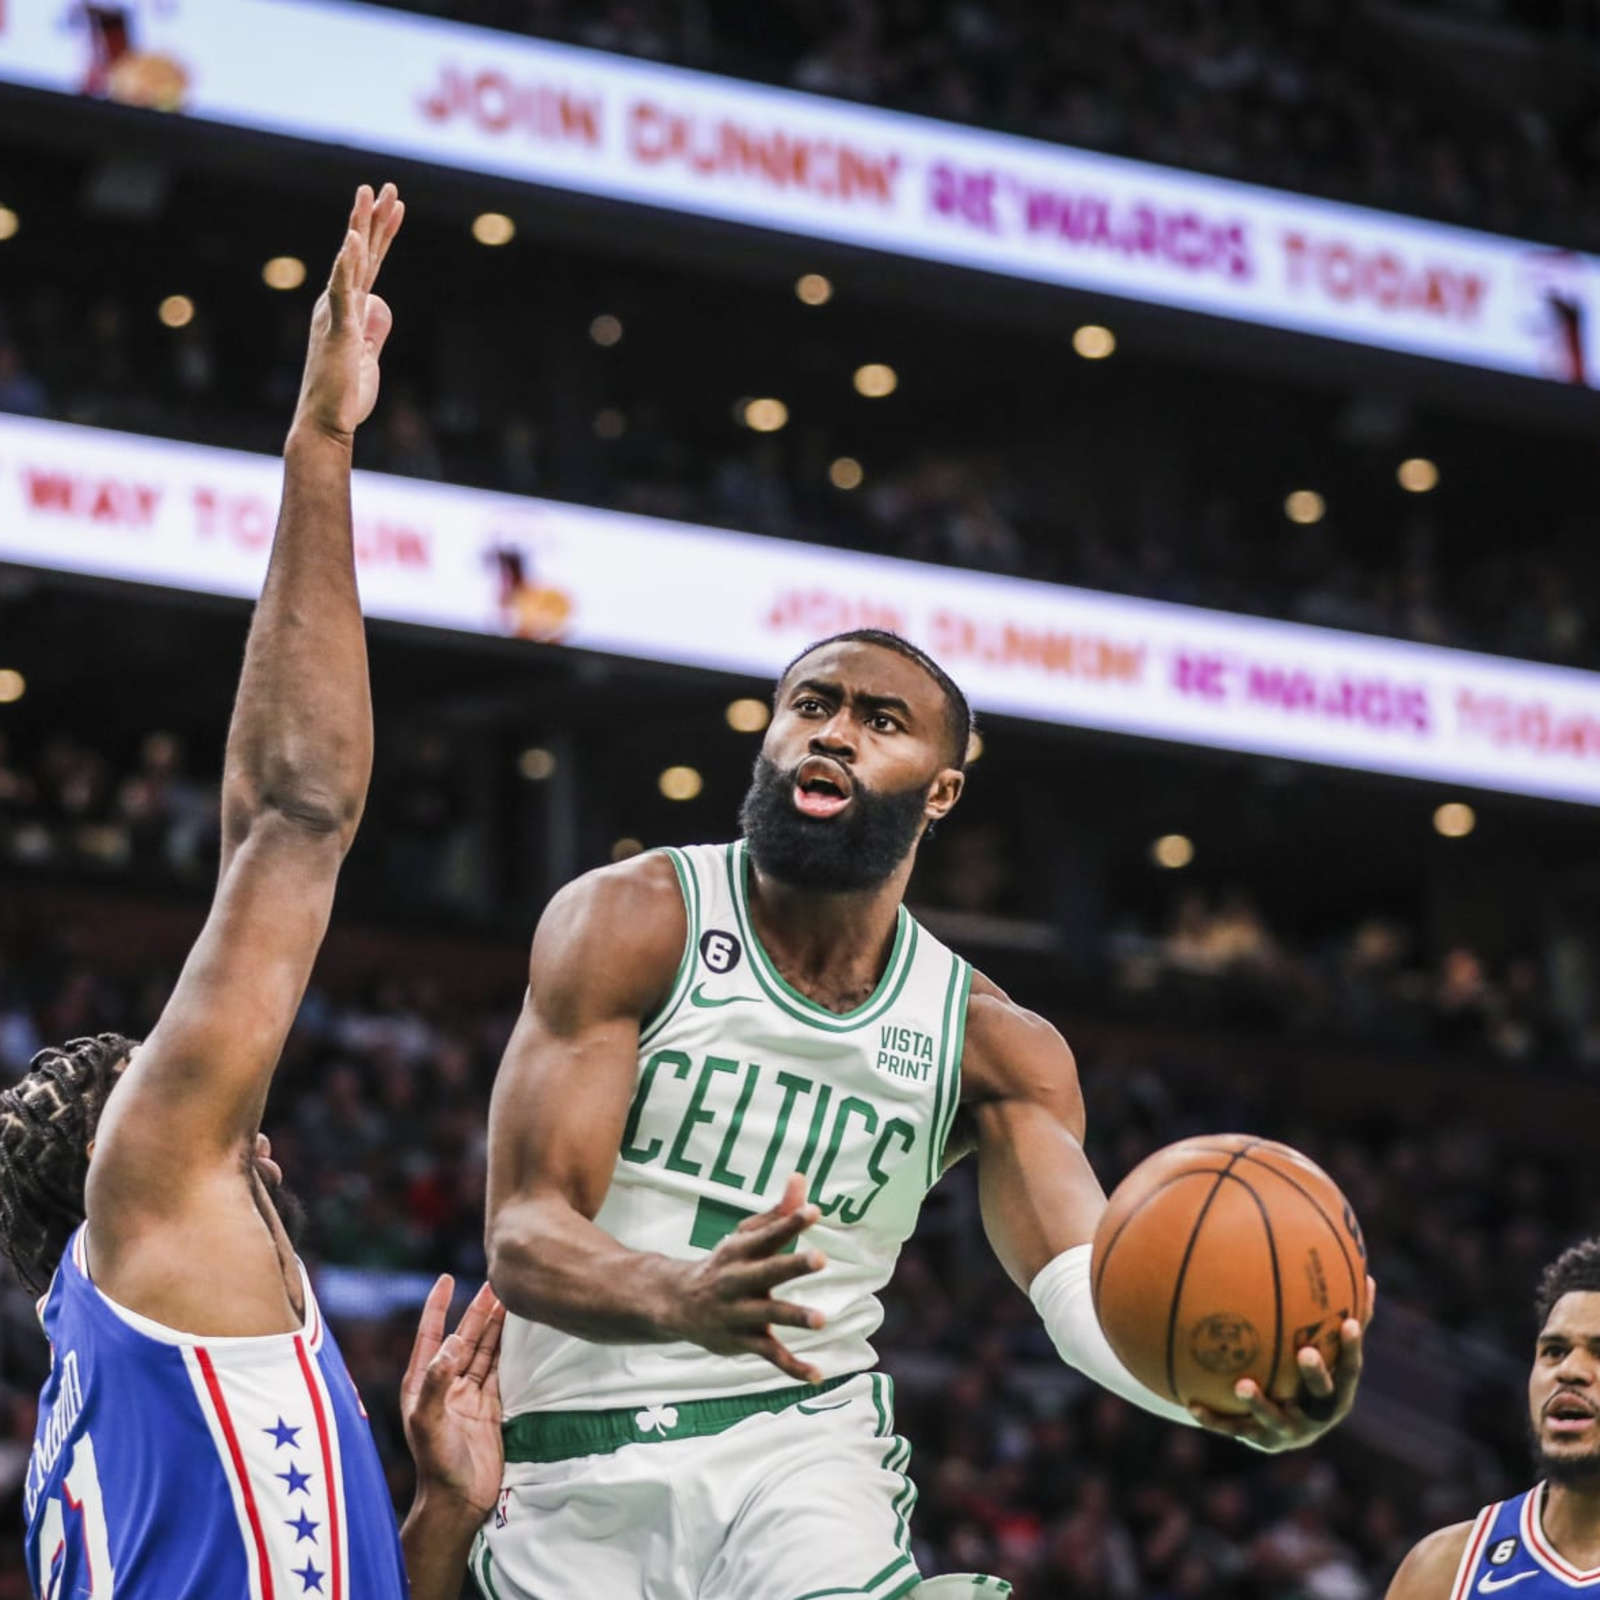 Why is Jaylen Brown wearing a face mask?